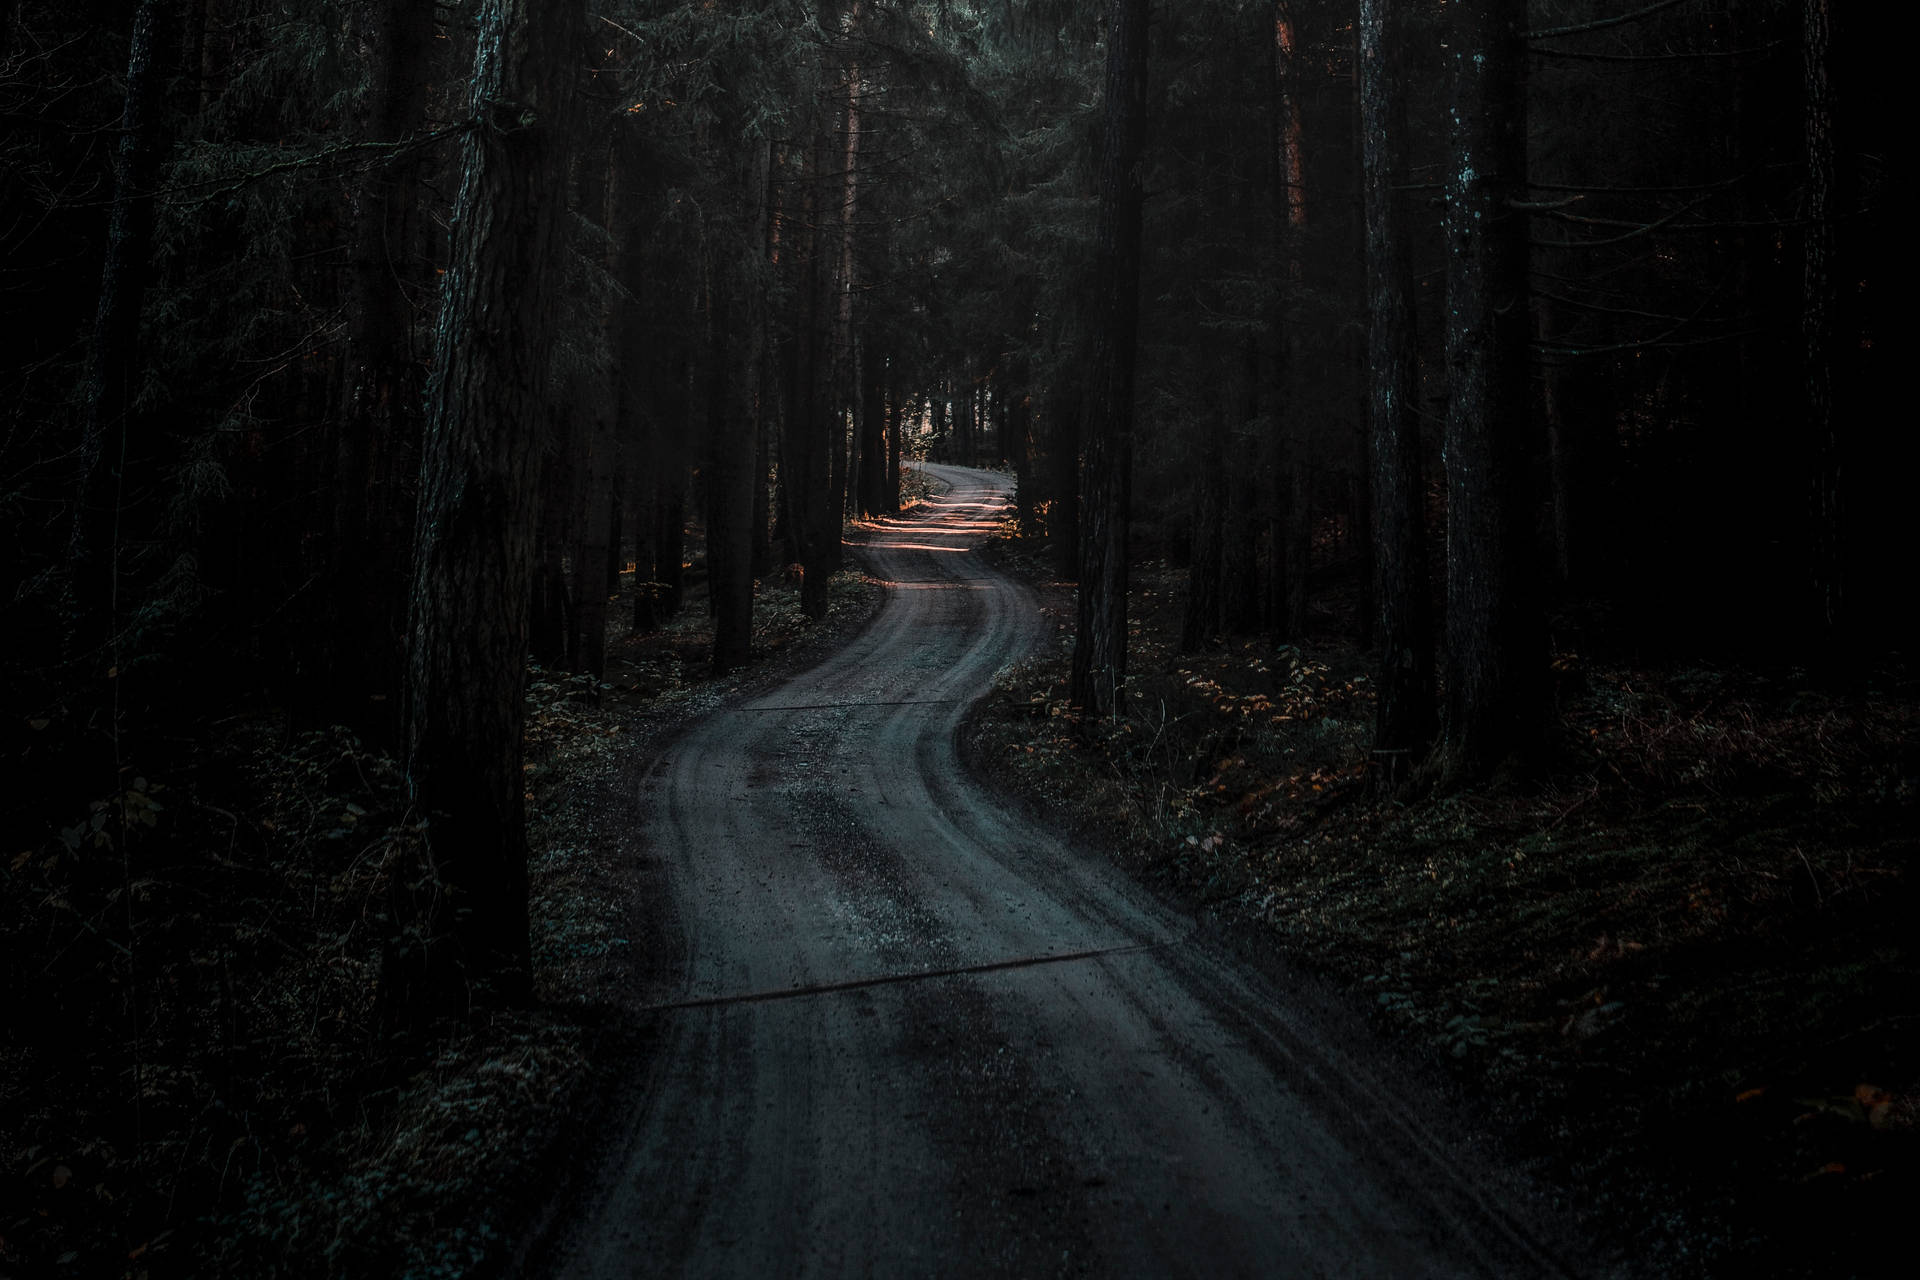 A dark forest road with a car's headlights in the distance. - Forest, woods